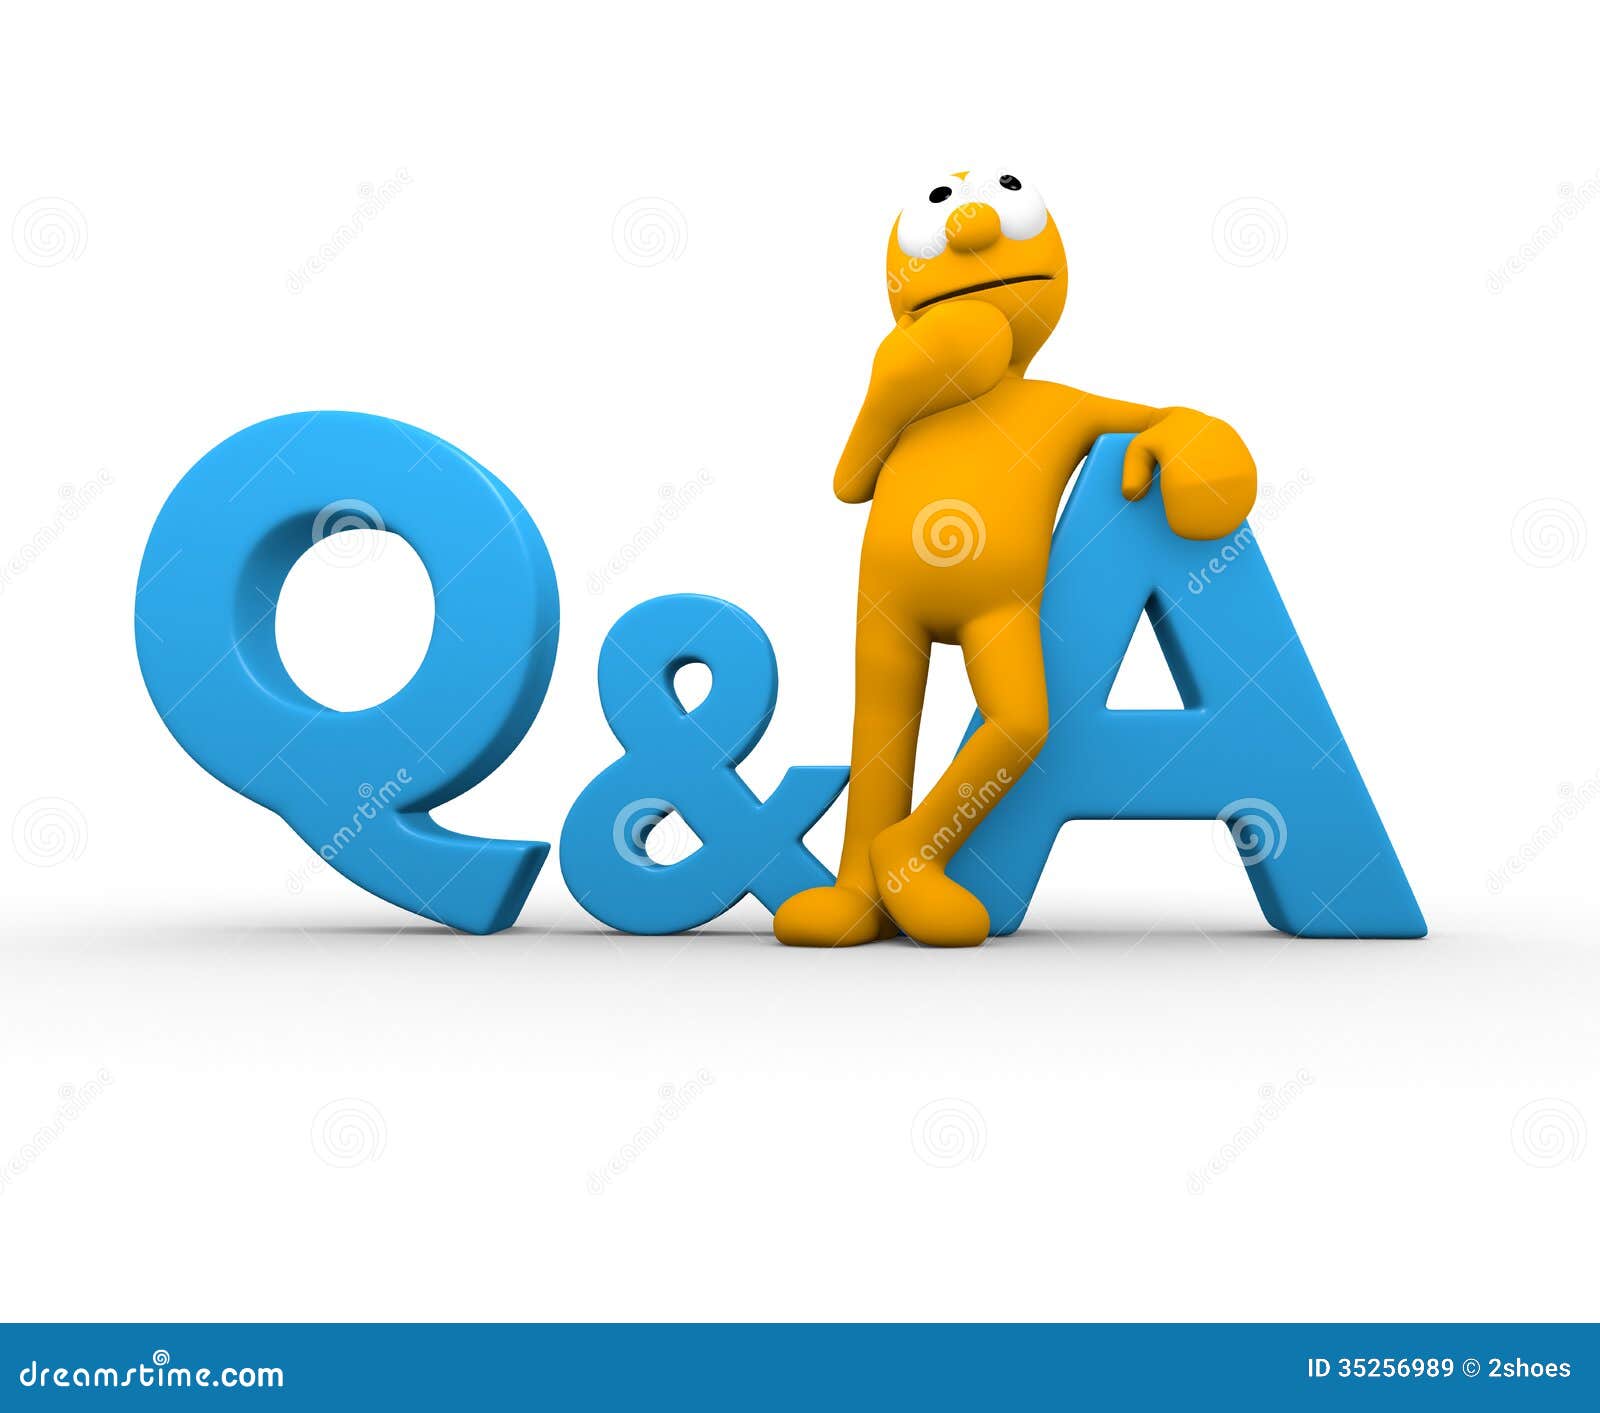 questions and answers clipart - photo #11